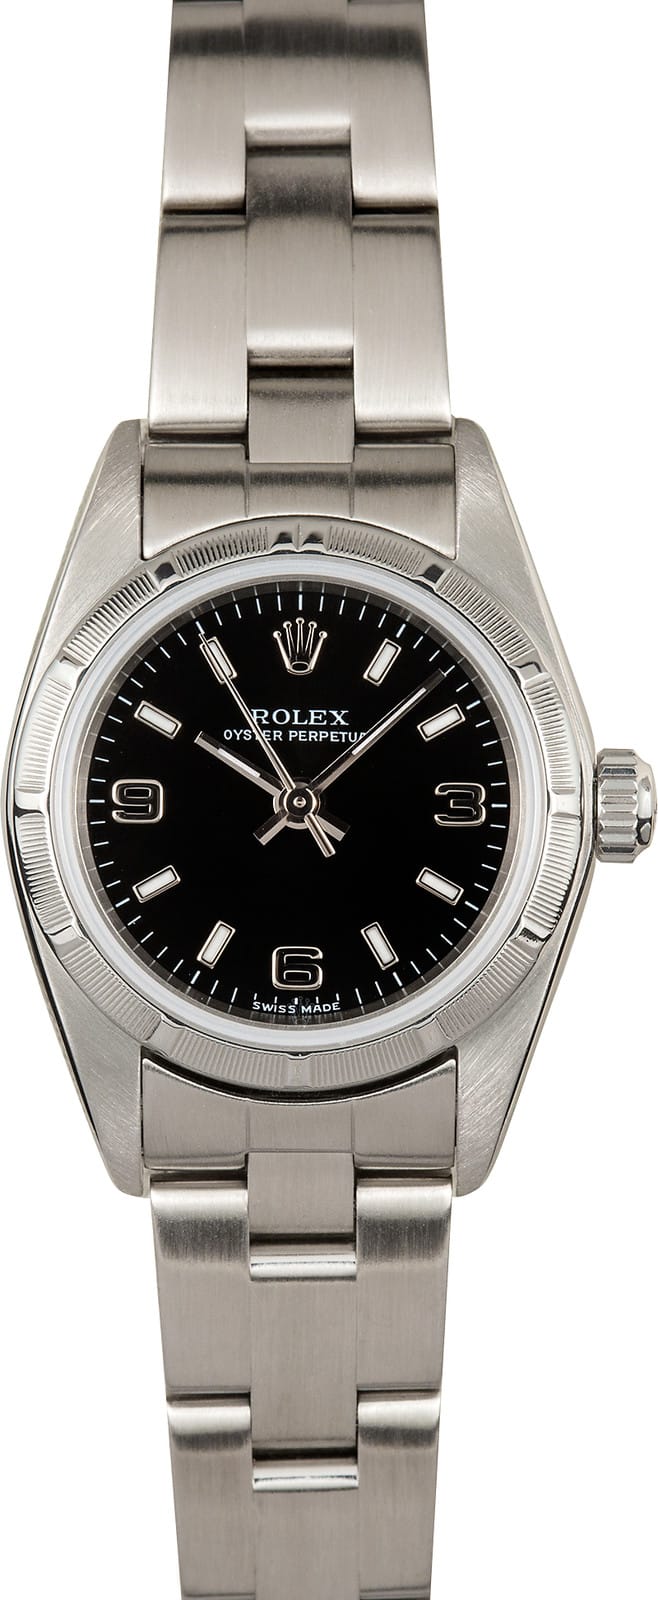 Buy Used Rolex 76030 | Bob's Watches 